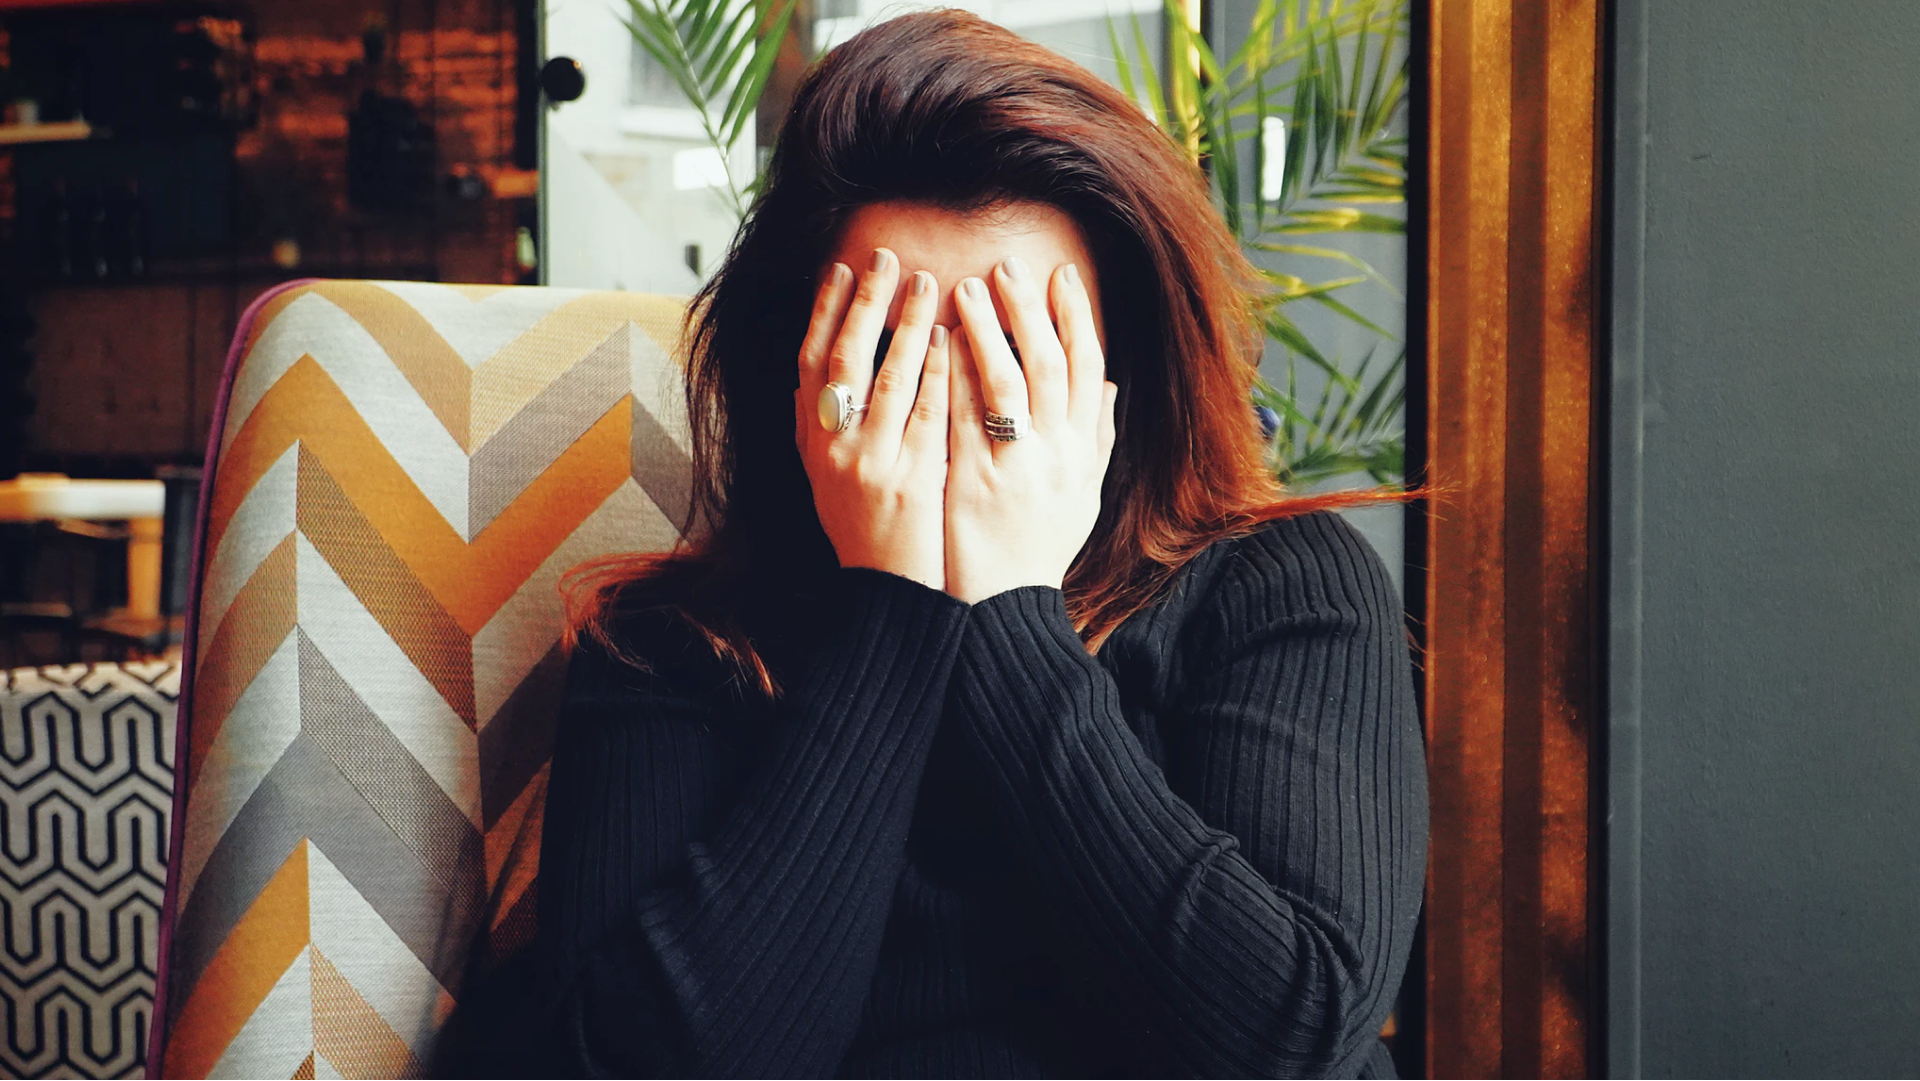 A stressed woman (who's maybe ruminating) covers her eyes with her hands, as she sits in a chair upholstered with chevron fabric.